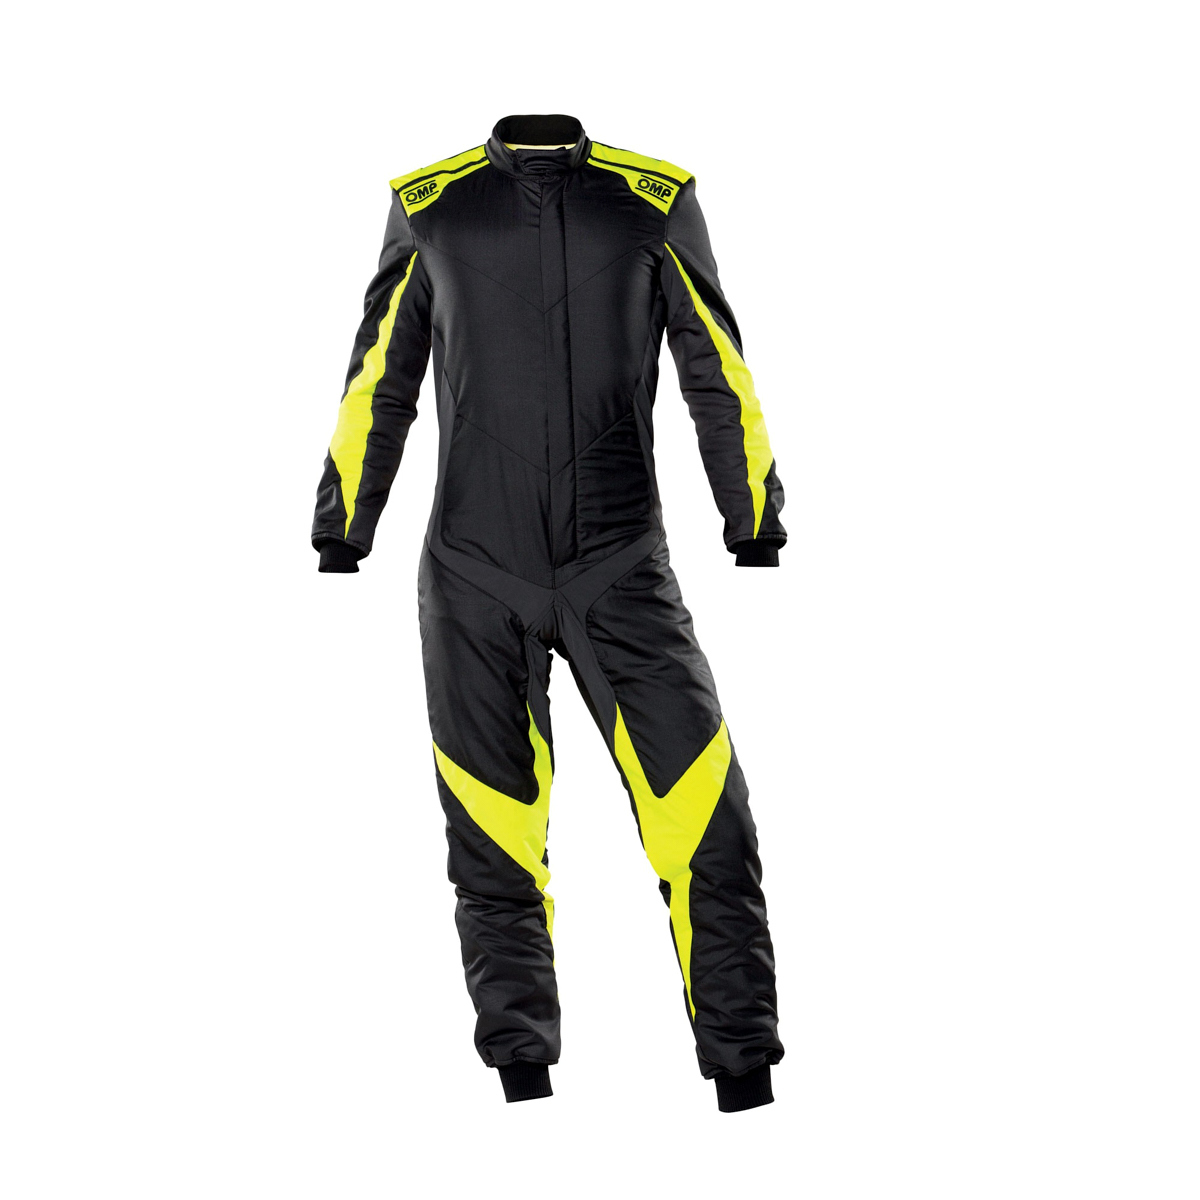 OMP Racing IA01859E17858 Driving Suit, Tecnica Evo, 1-Piece, SFI 3.2A/5, FIA Approved, Double Layer, Fire Retardant Fabric, Black / Fluorescent Yellow, Size 58, Each